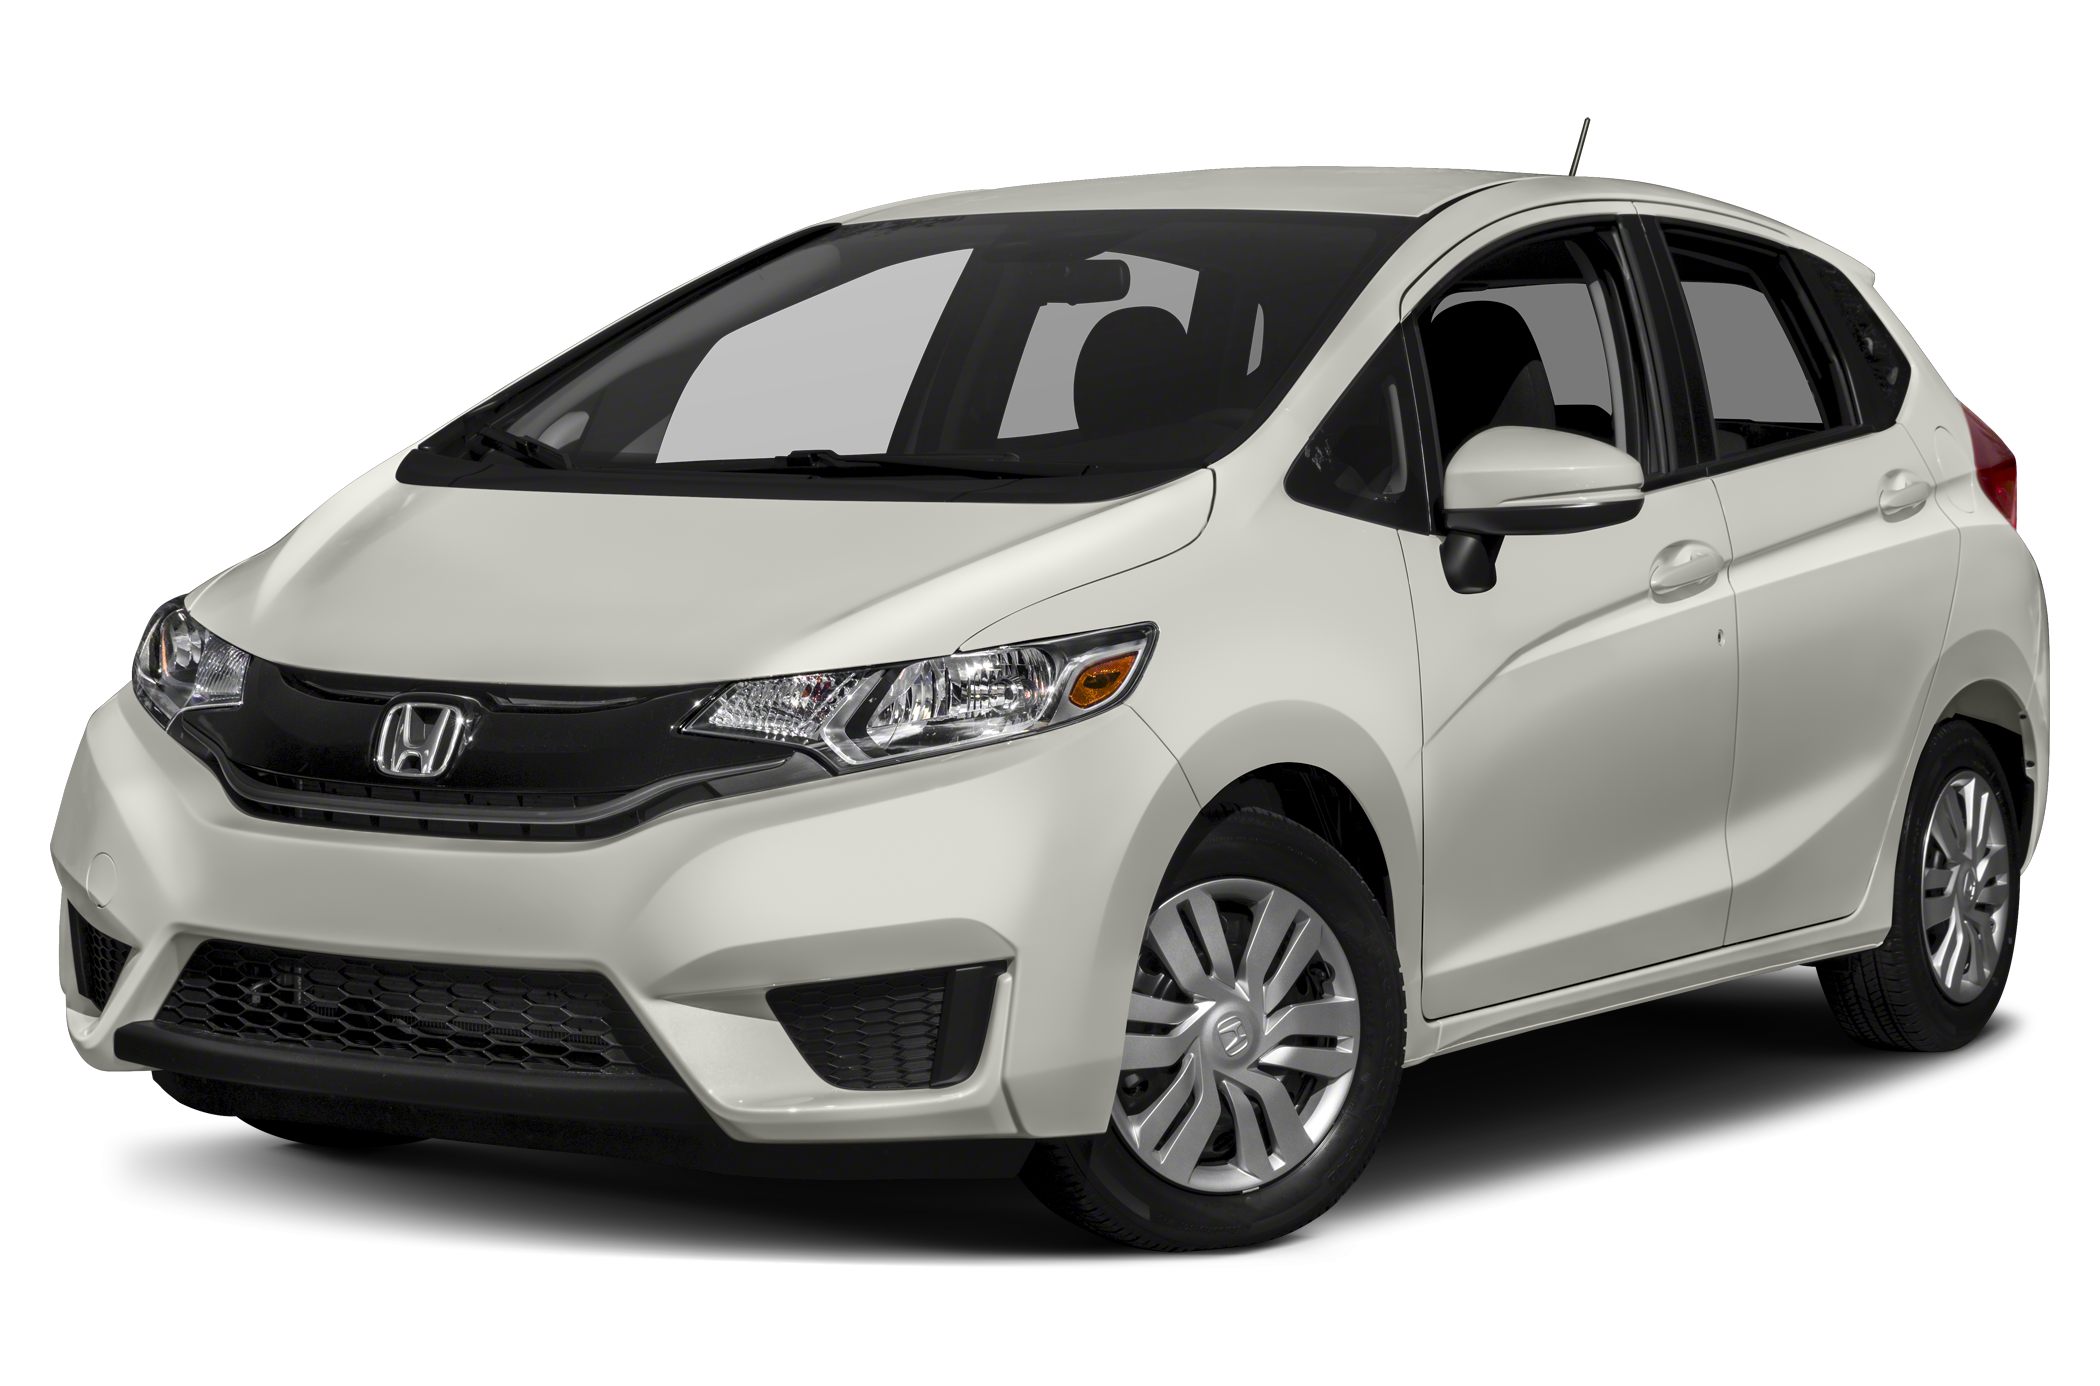 2017 Honda Fit oem parts and accessories on sale